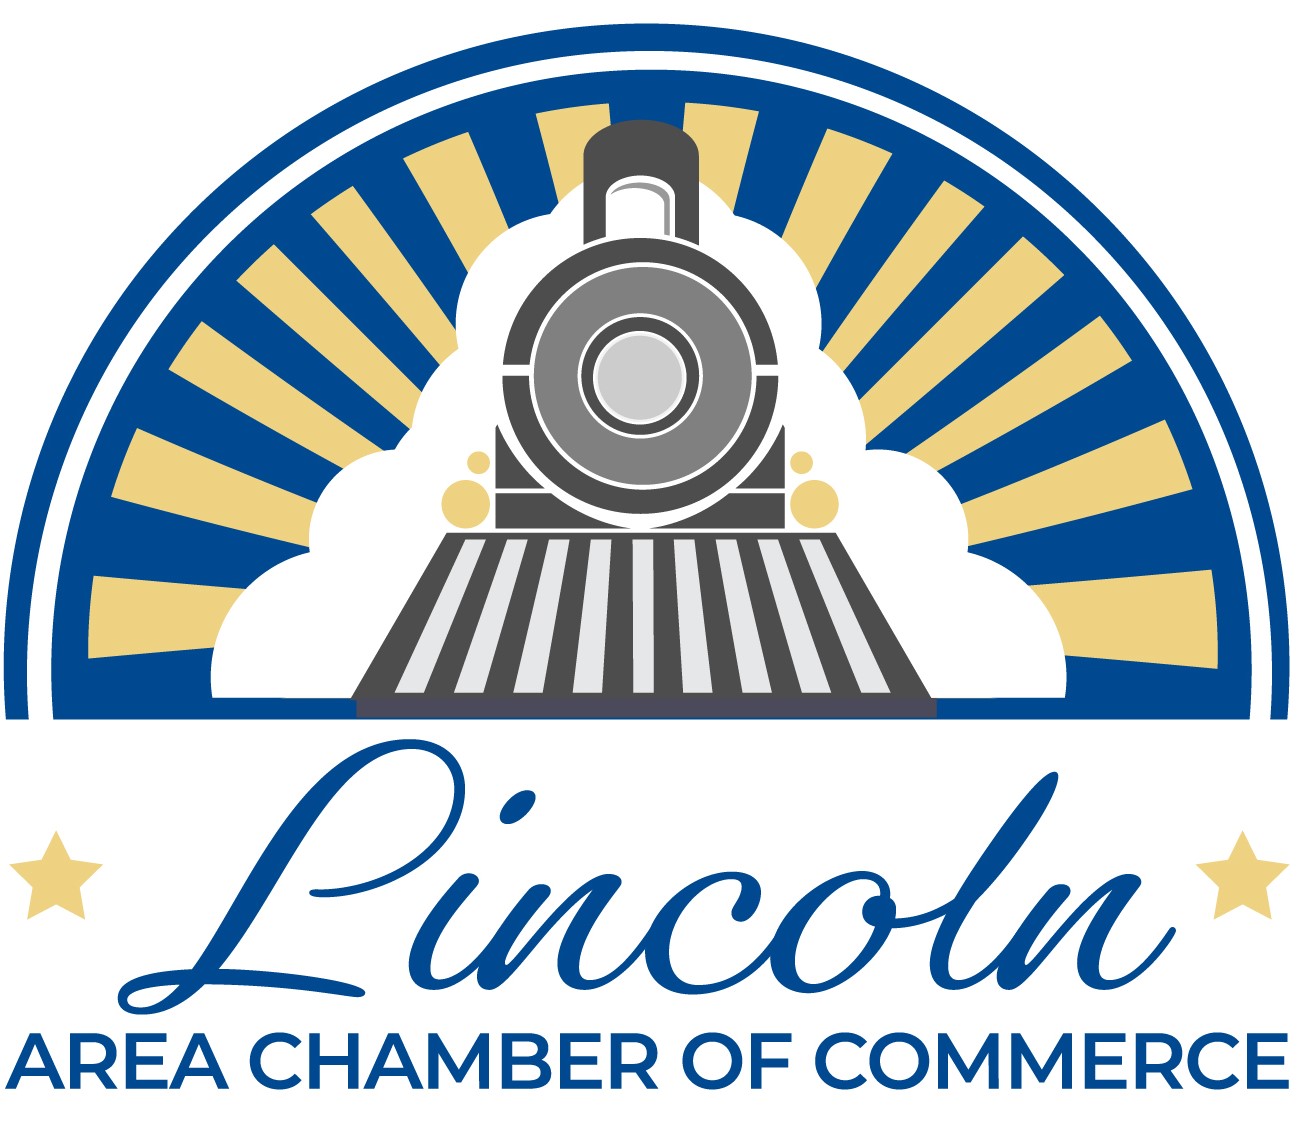 Lincoln Area Chamber of Commerce